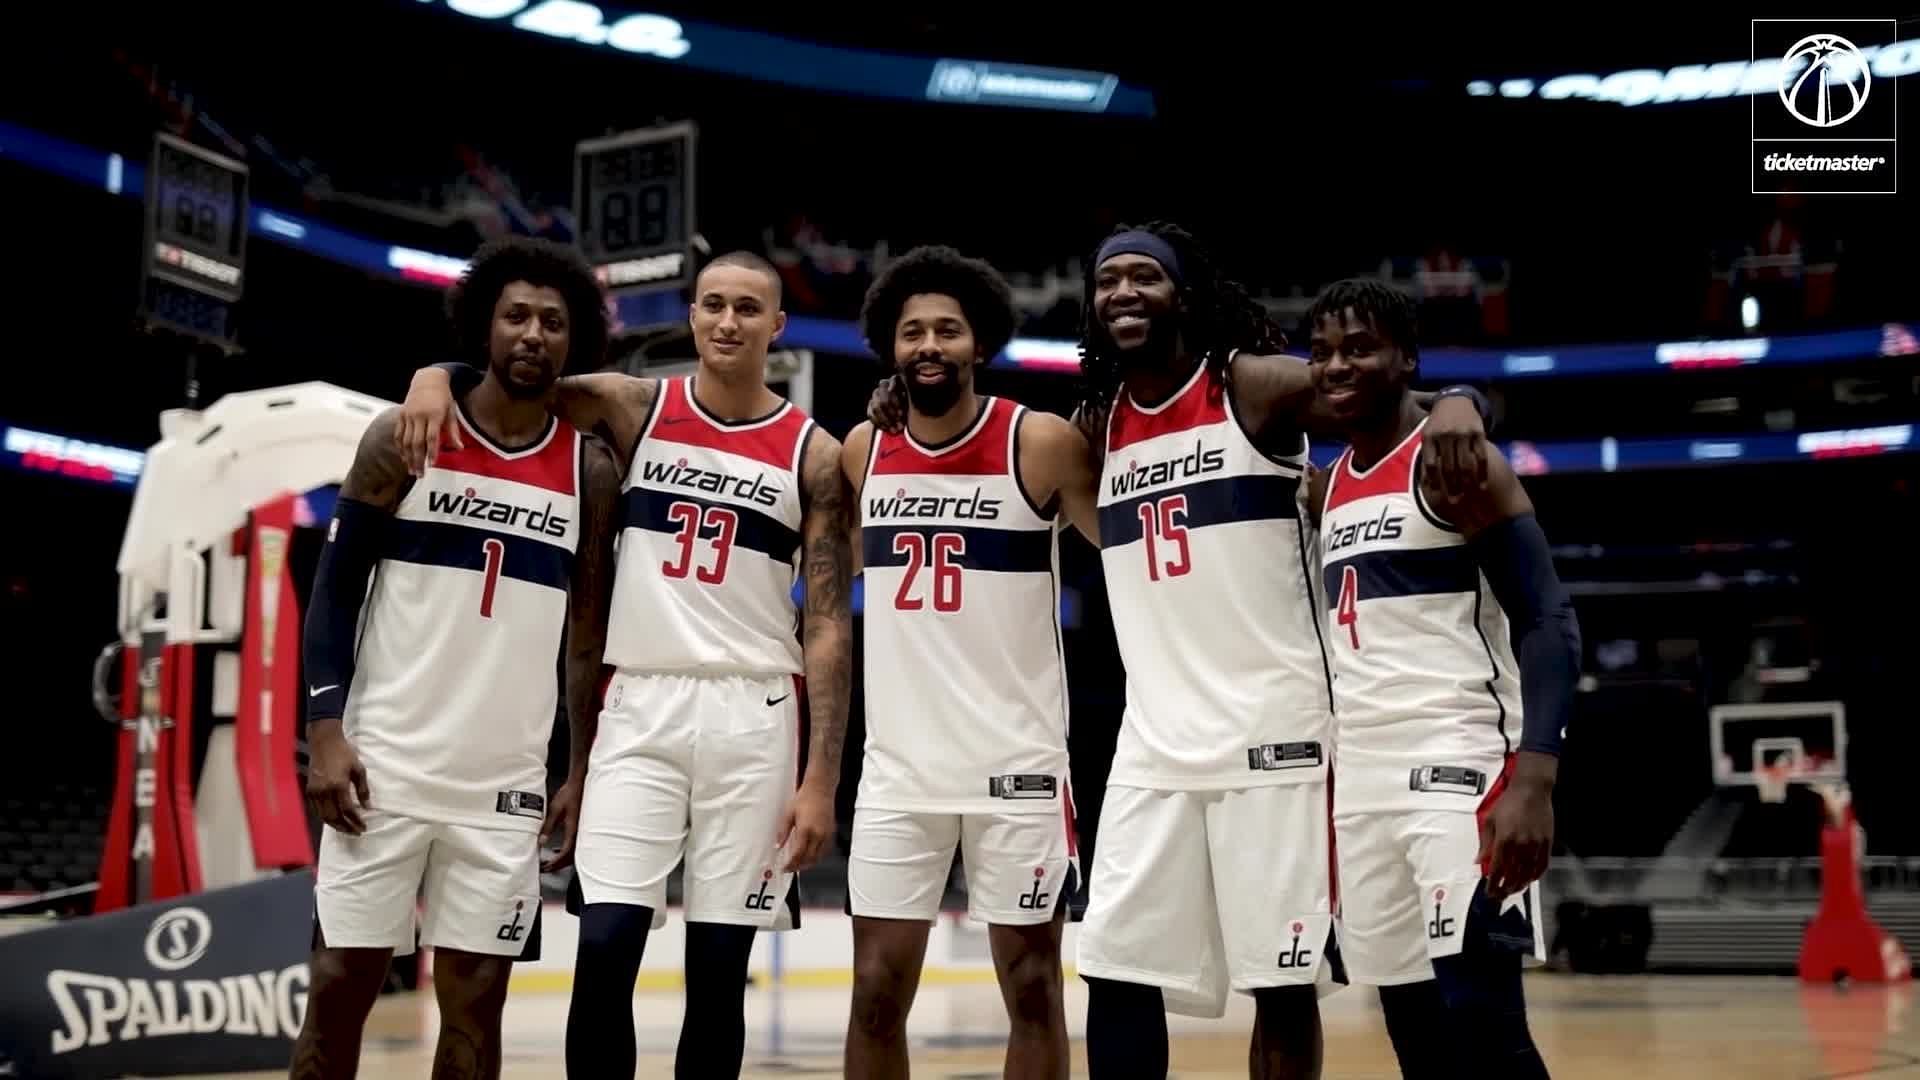 Kyle Kuzma and two other former teammates of LeBron James are making the Washington Wizards one of the best in the NBA right now. [Photo: NBA.com]